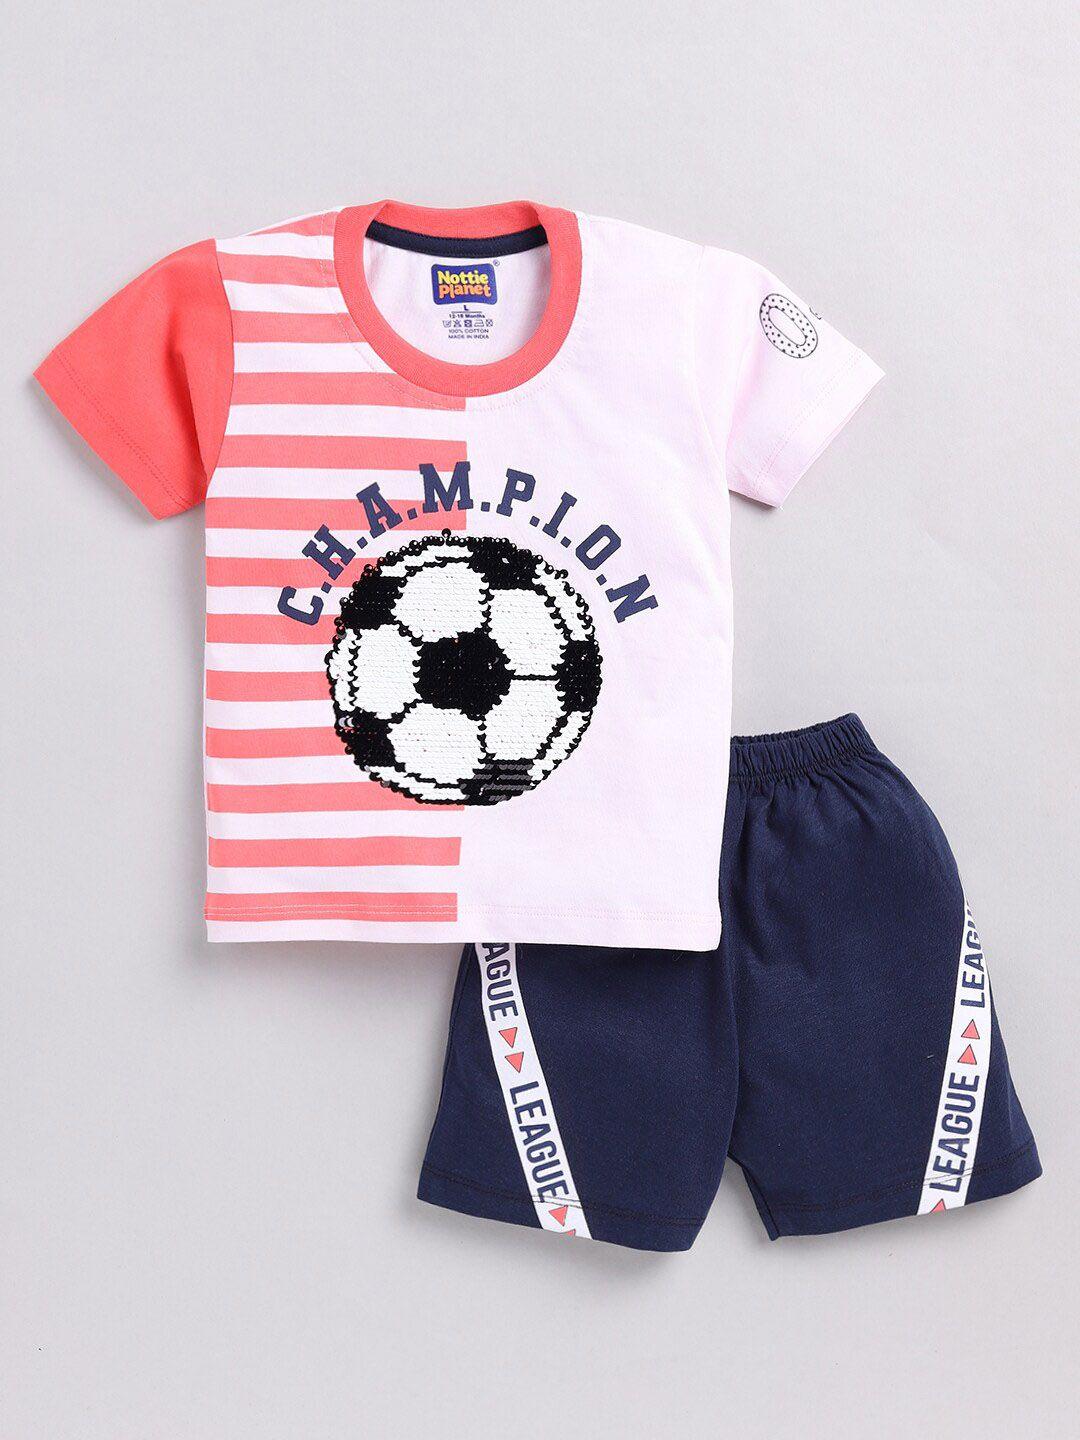 nottie planet football printed t-shirt with shorts